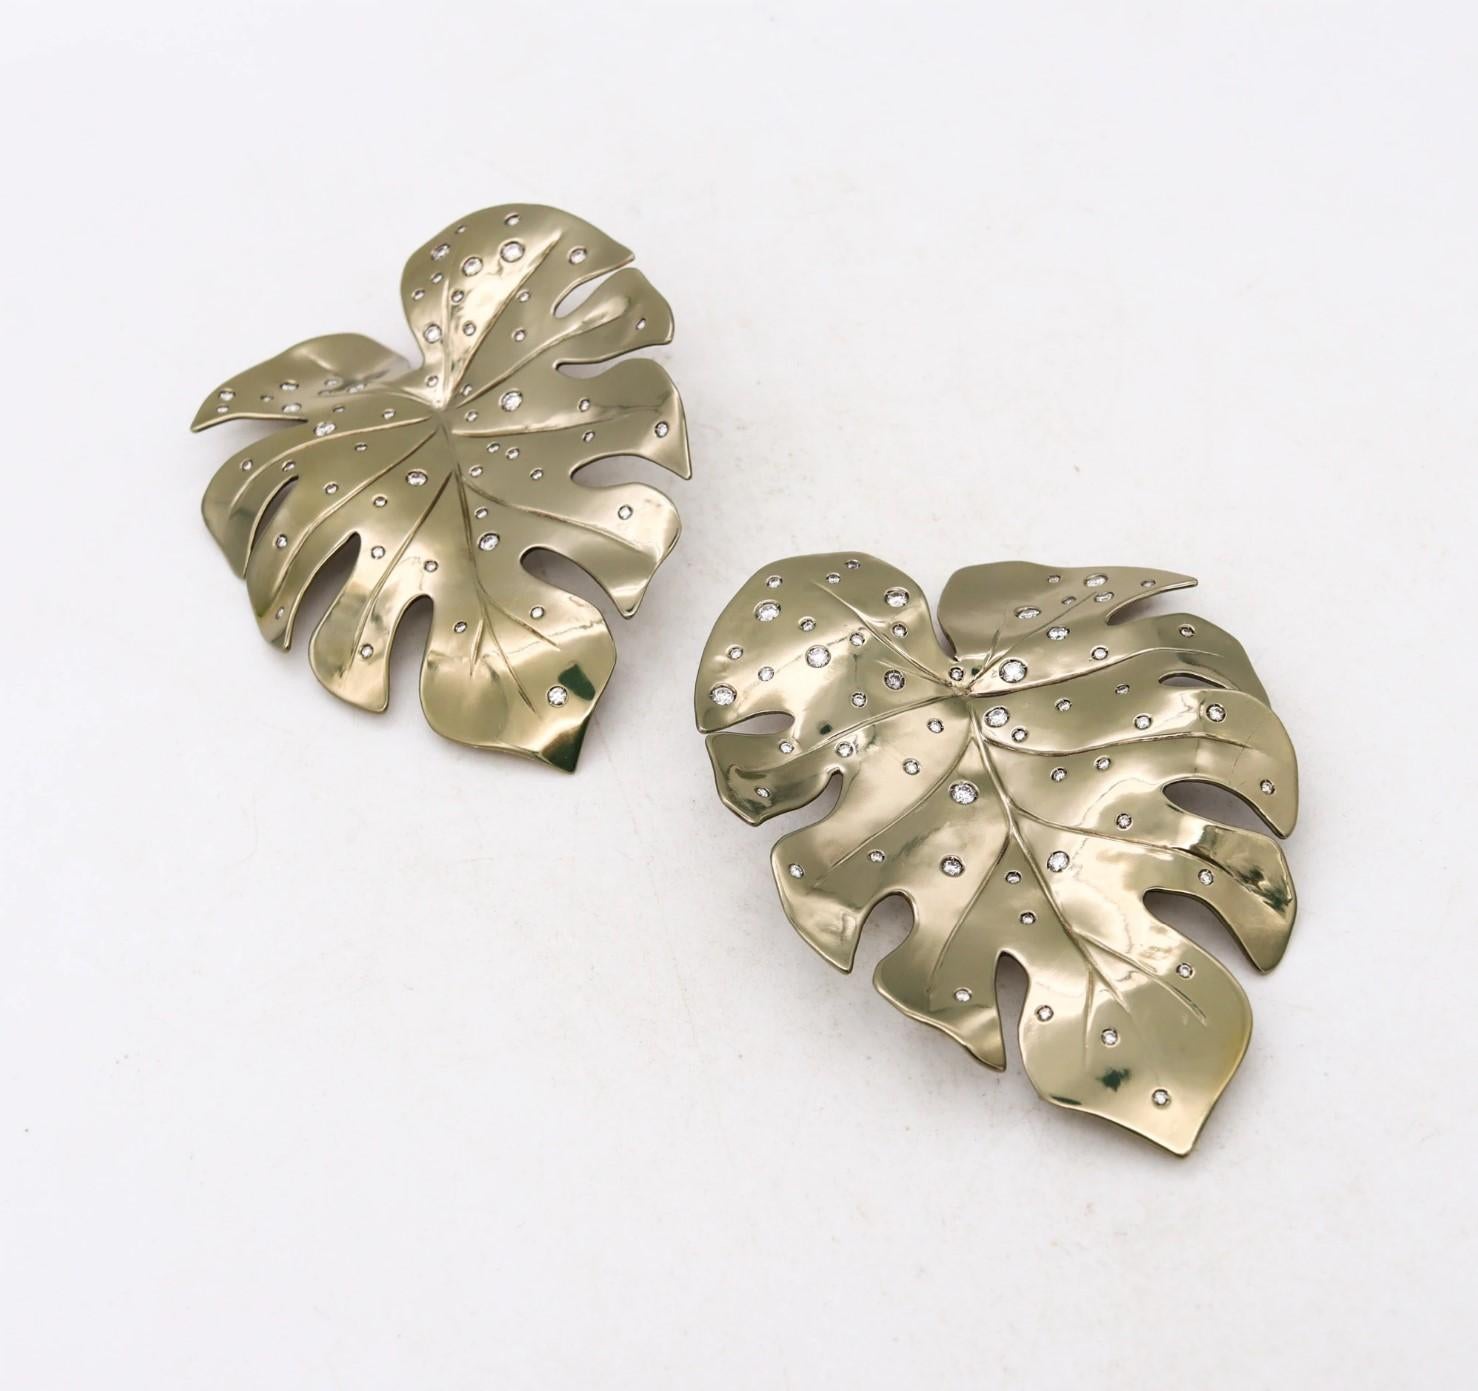 Clips-earrings designed by Suzanne Syz.

Fabulous oversized sculptural pieces, created  by the jewelry designer based in Geneva Switzerland, Suzanne Syz. These convertible organics clips-earrings has been carefully crafted in yellow gold of 18